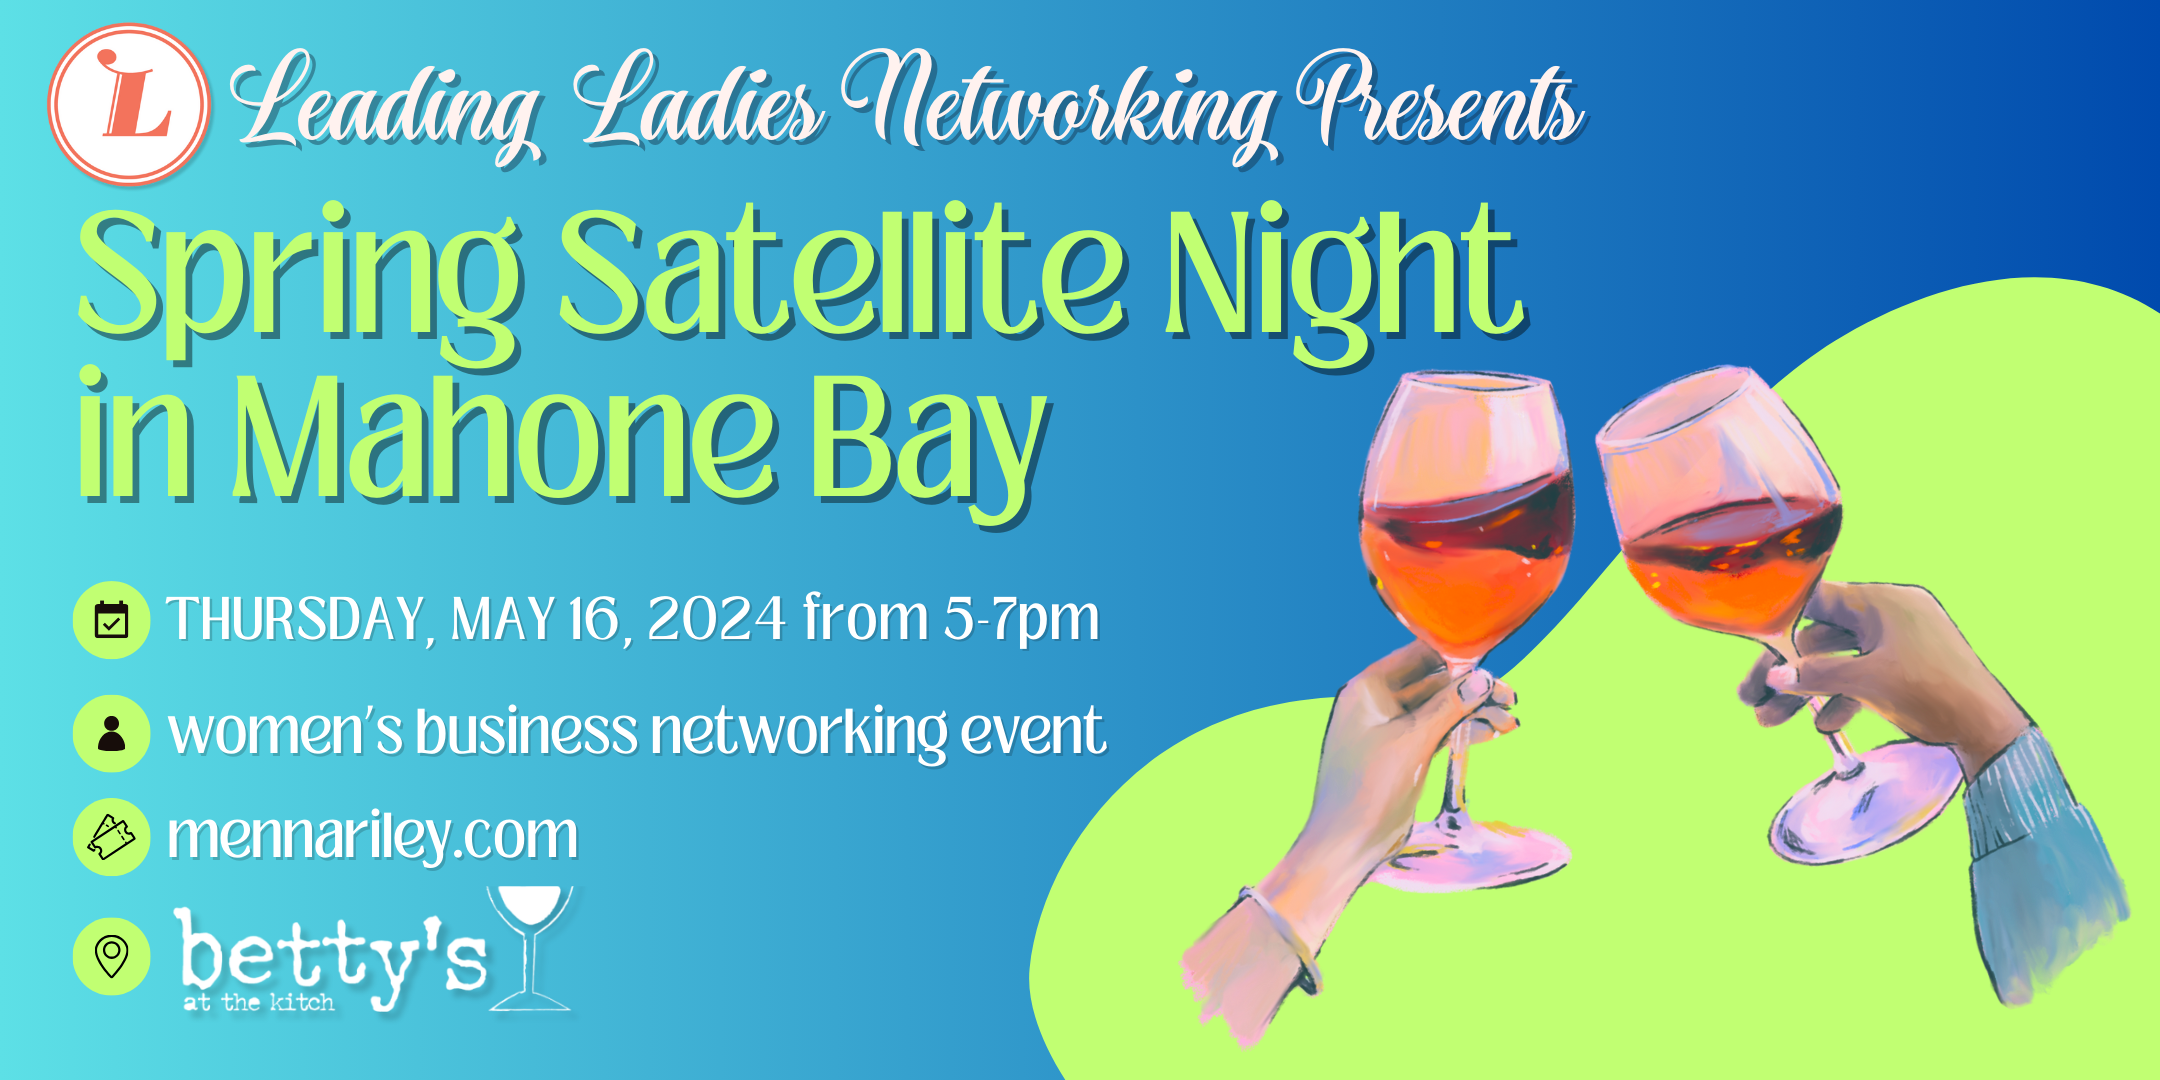 Leading Ladies Networking - 50th Event